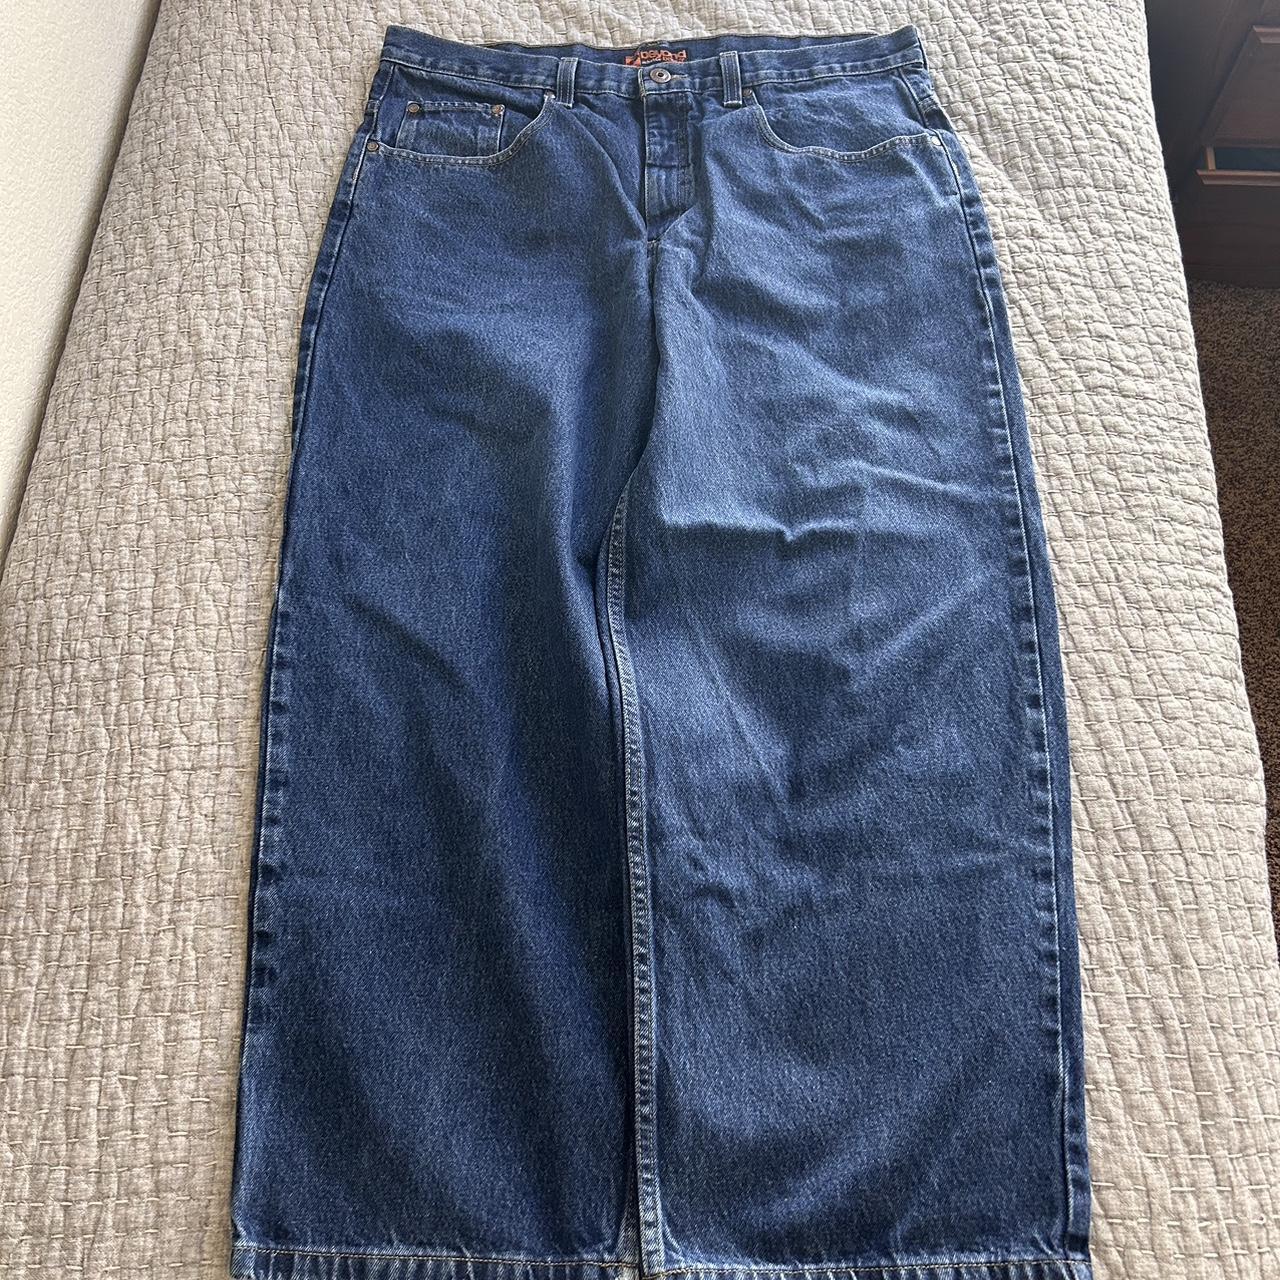 Anchor Blue Beyond Baggys, fit really baggy - Depop